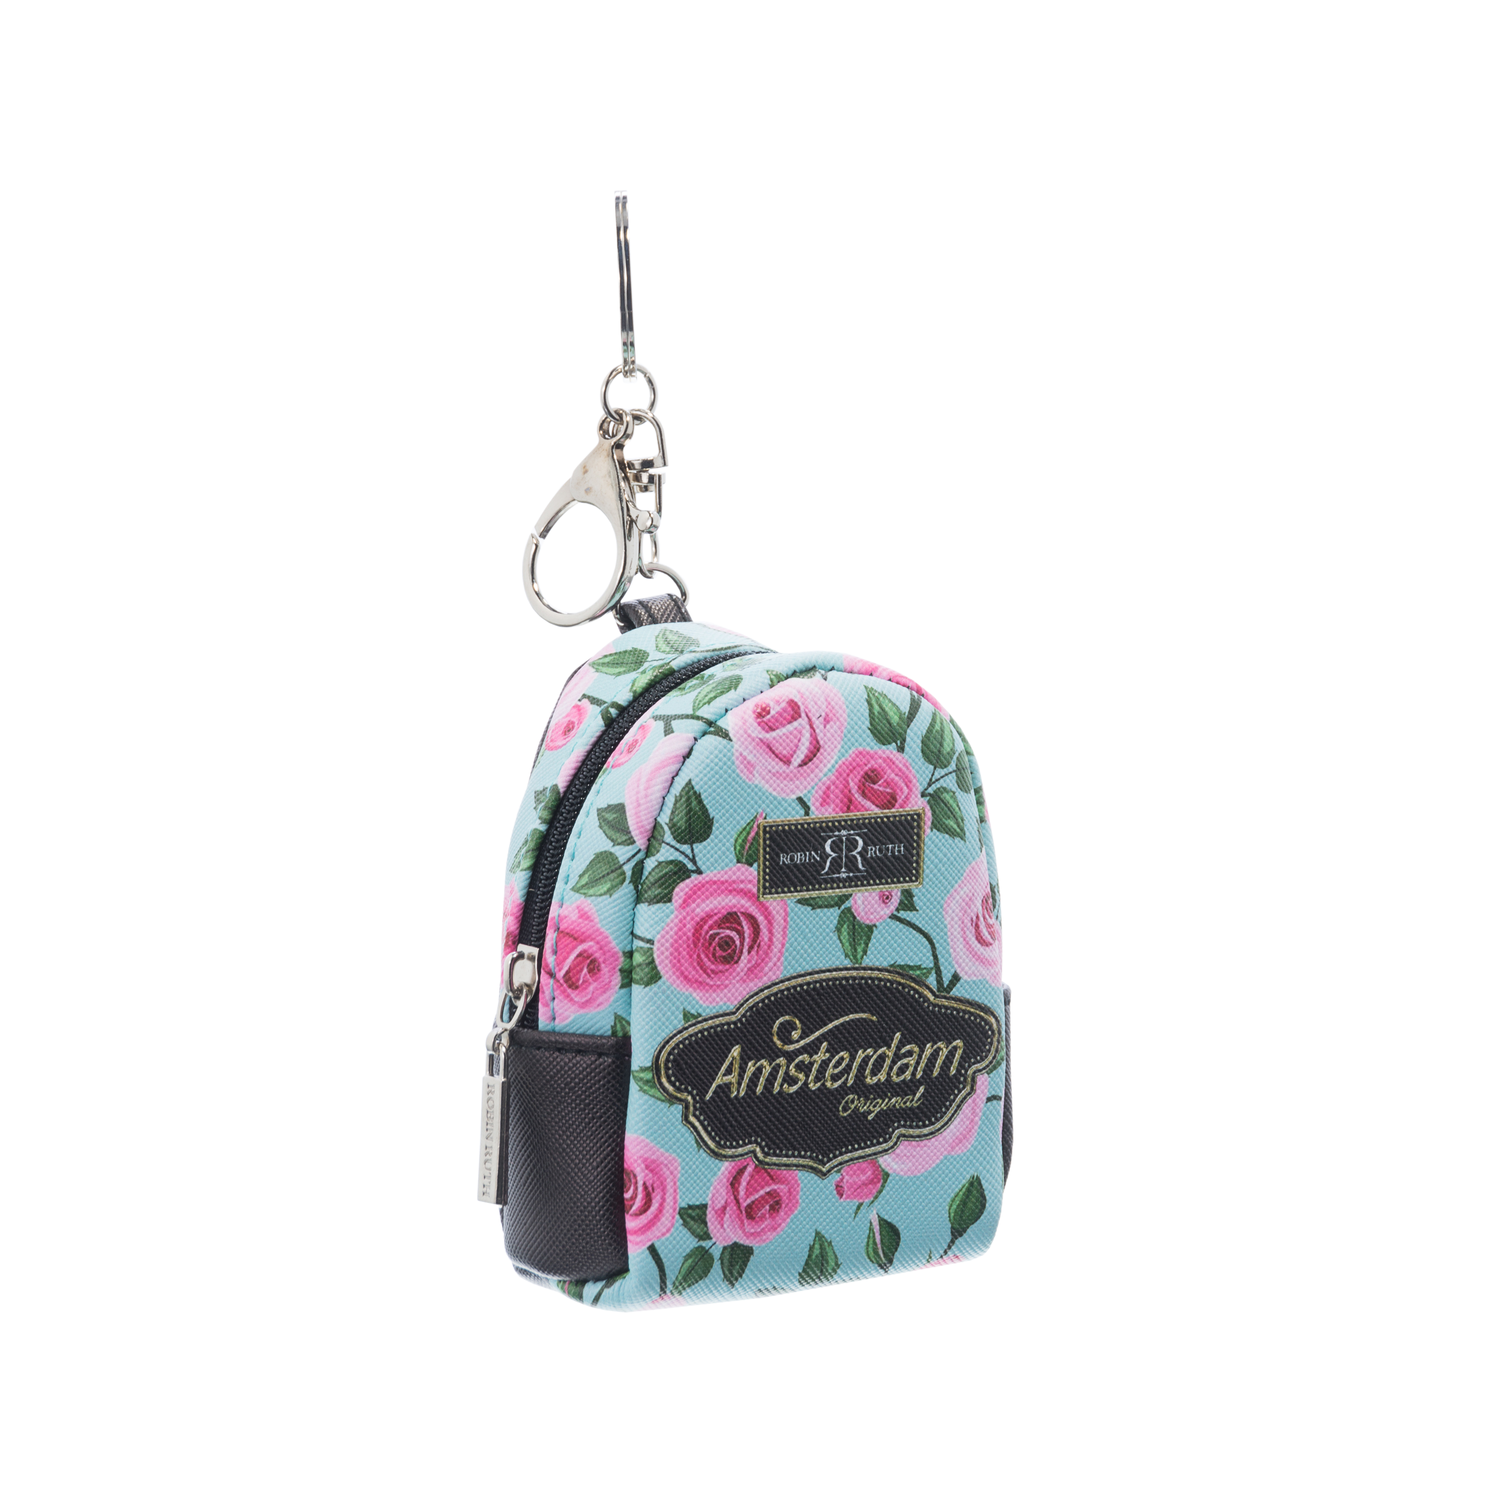 Quinty S - Wallet / Keyholder - Amsterdam - Flowers